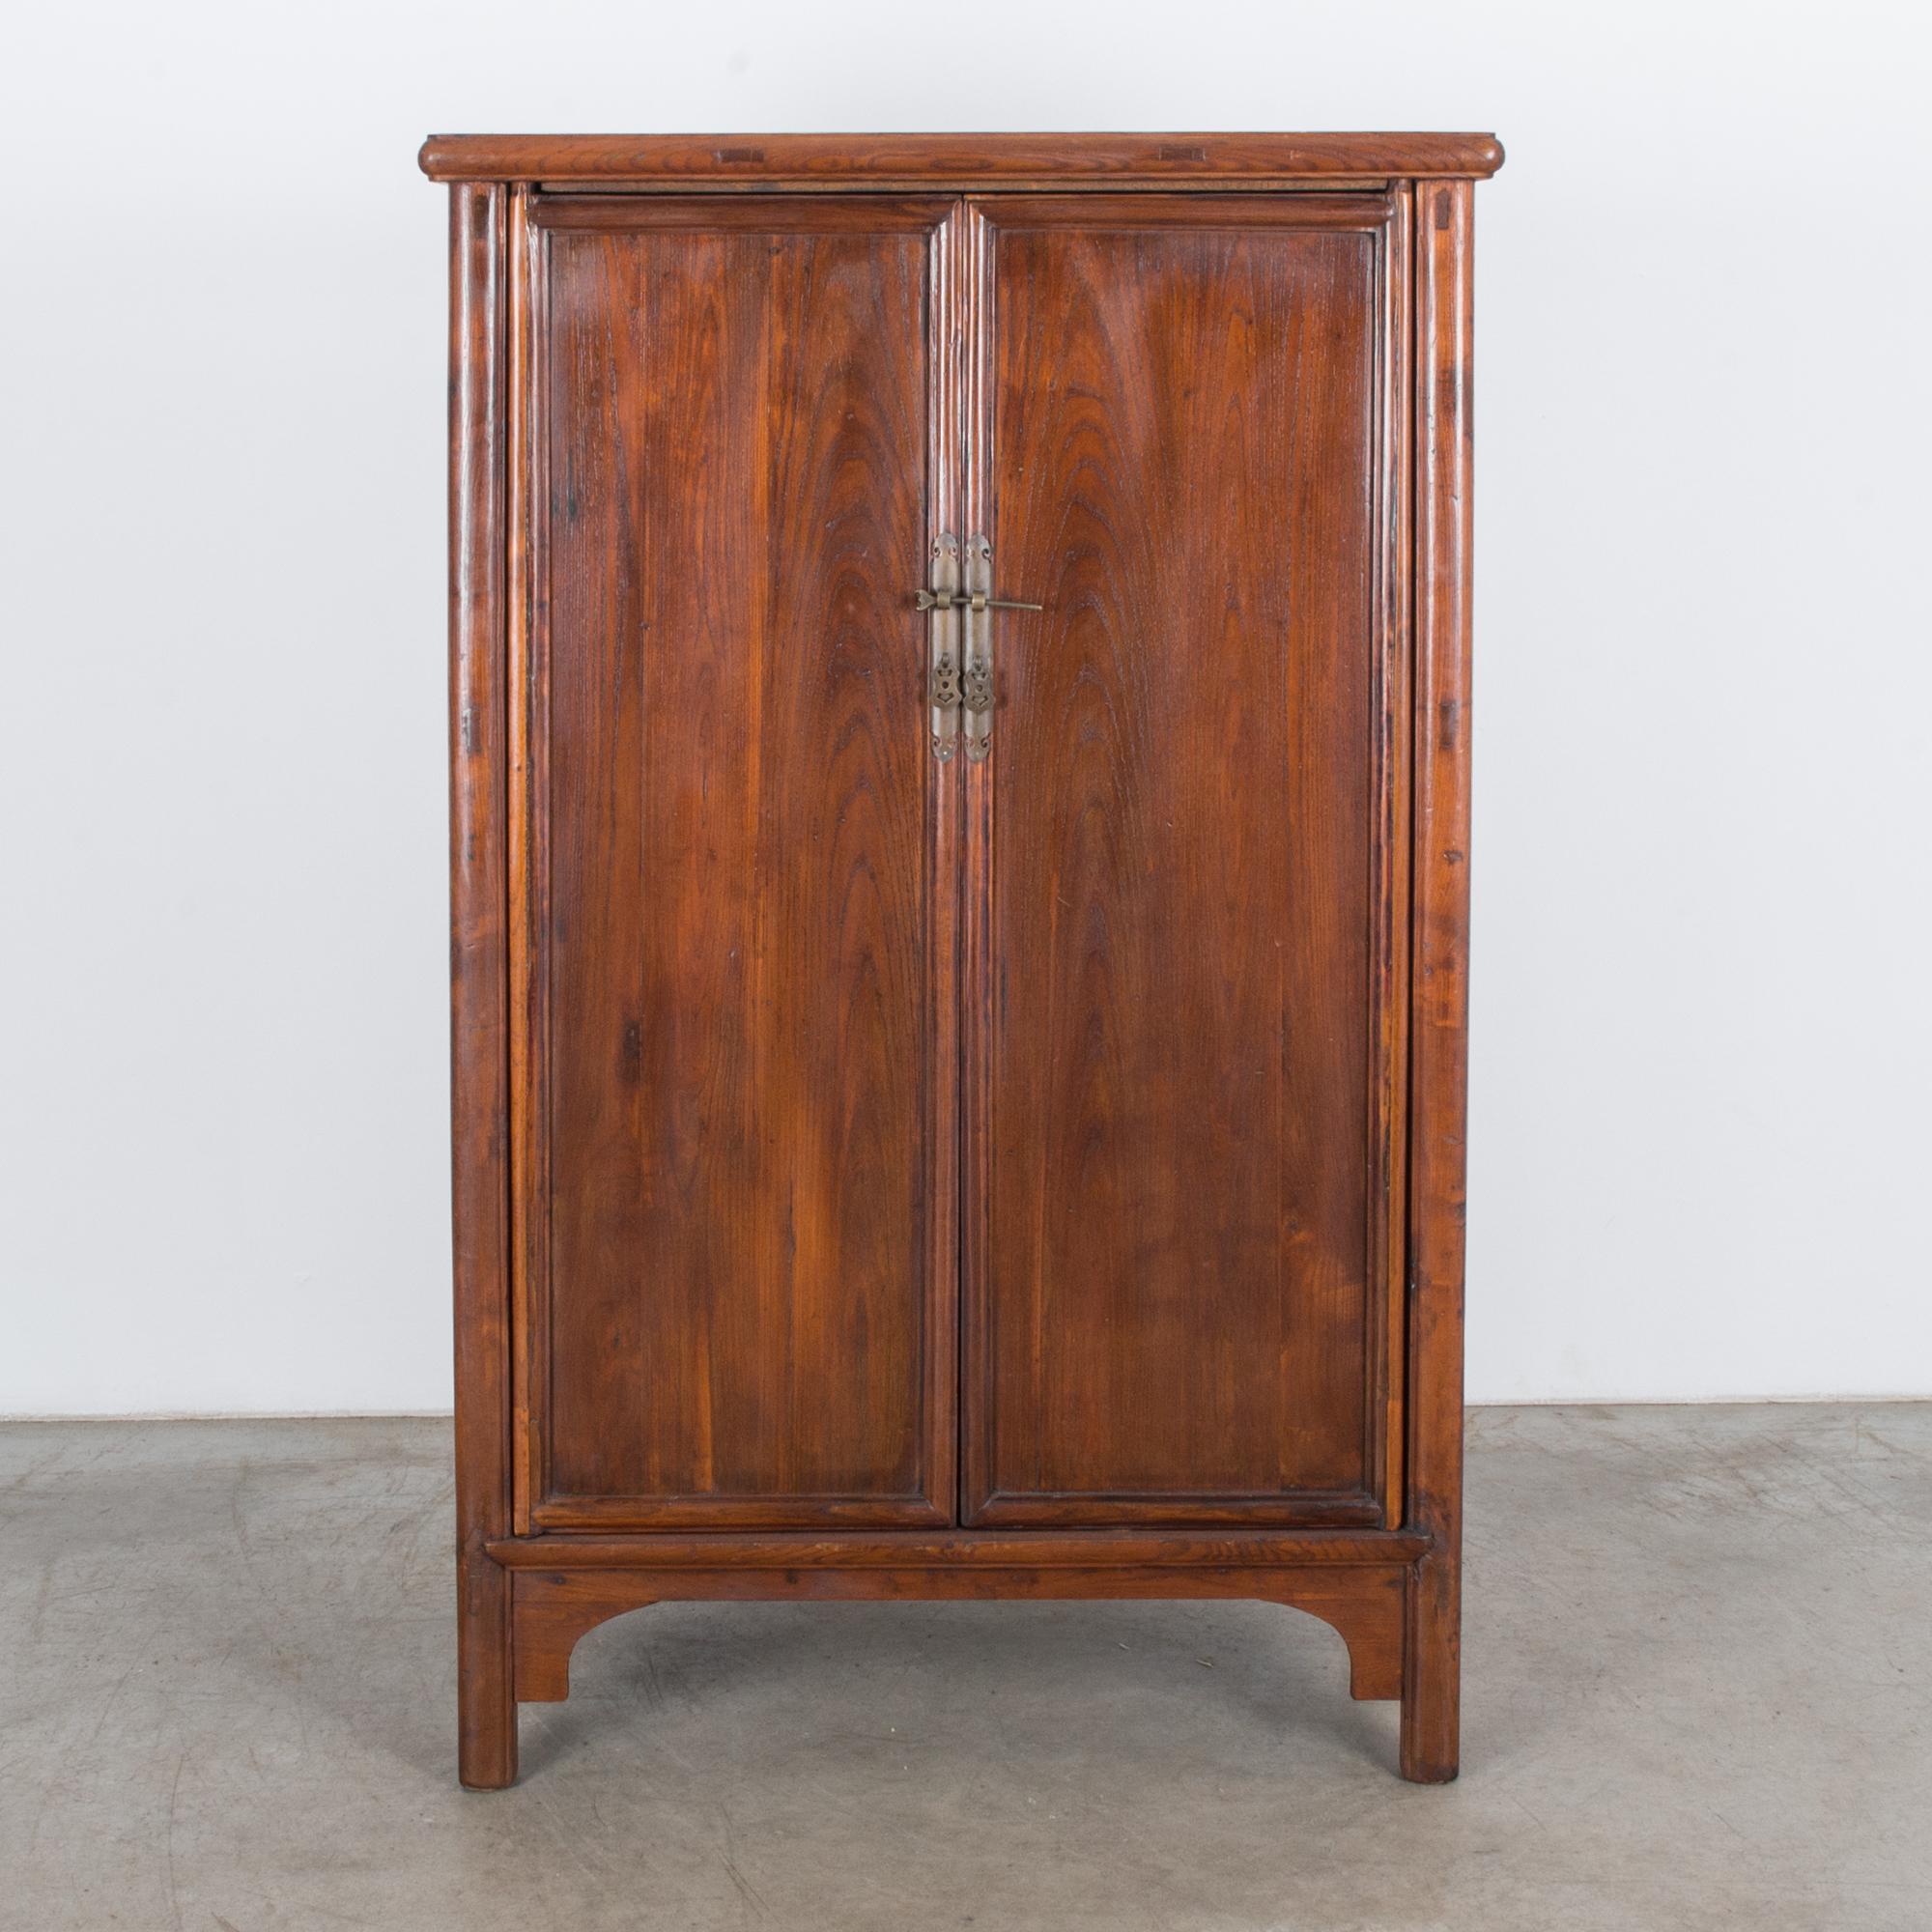 This wooden armoire was made in China, circa 1900. The double doors open to reveal a spacious interior with a shelf and two drawers. A decorative locking pin secures the doors, and it is slightly raised on four legs. With its lovely patina and rich